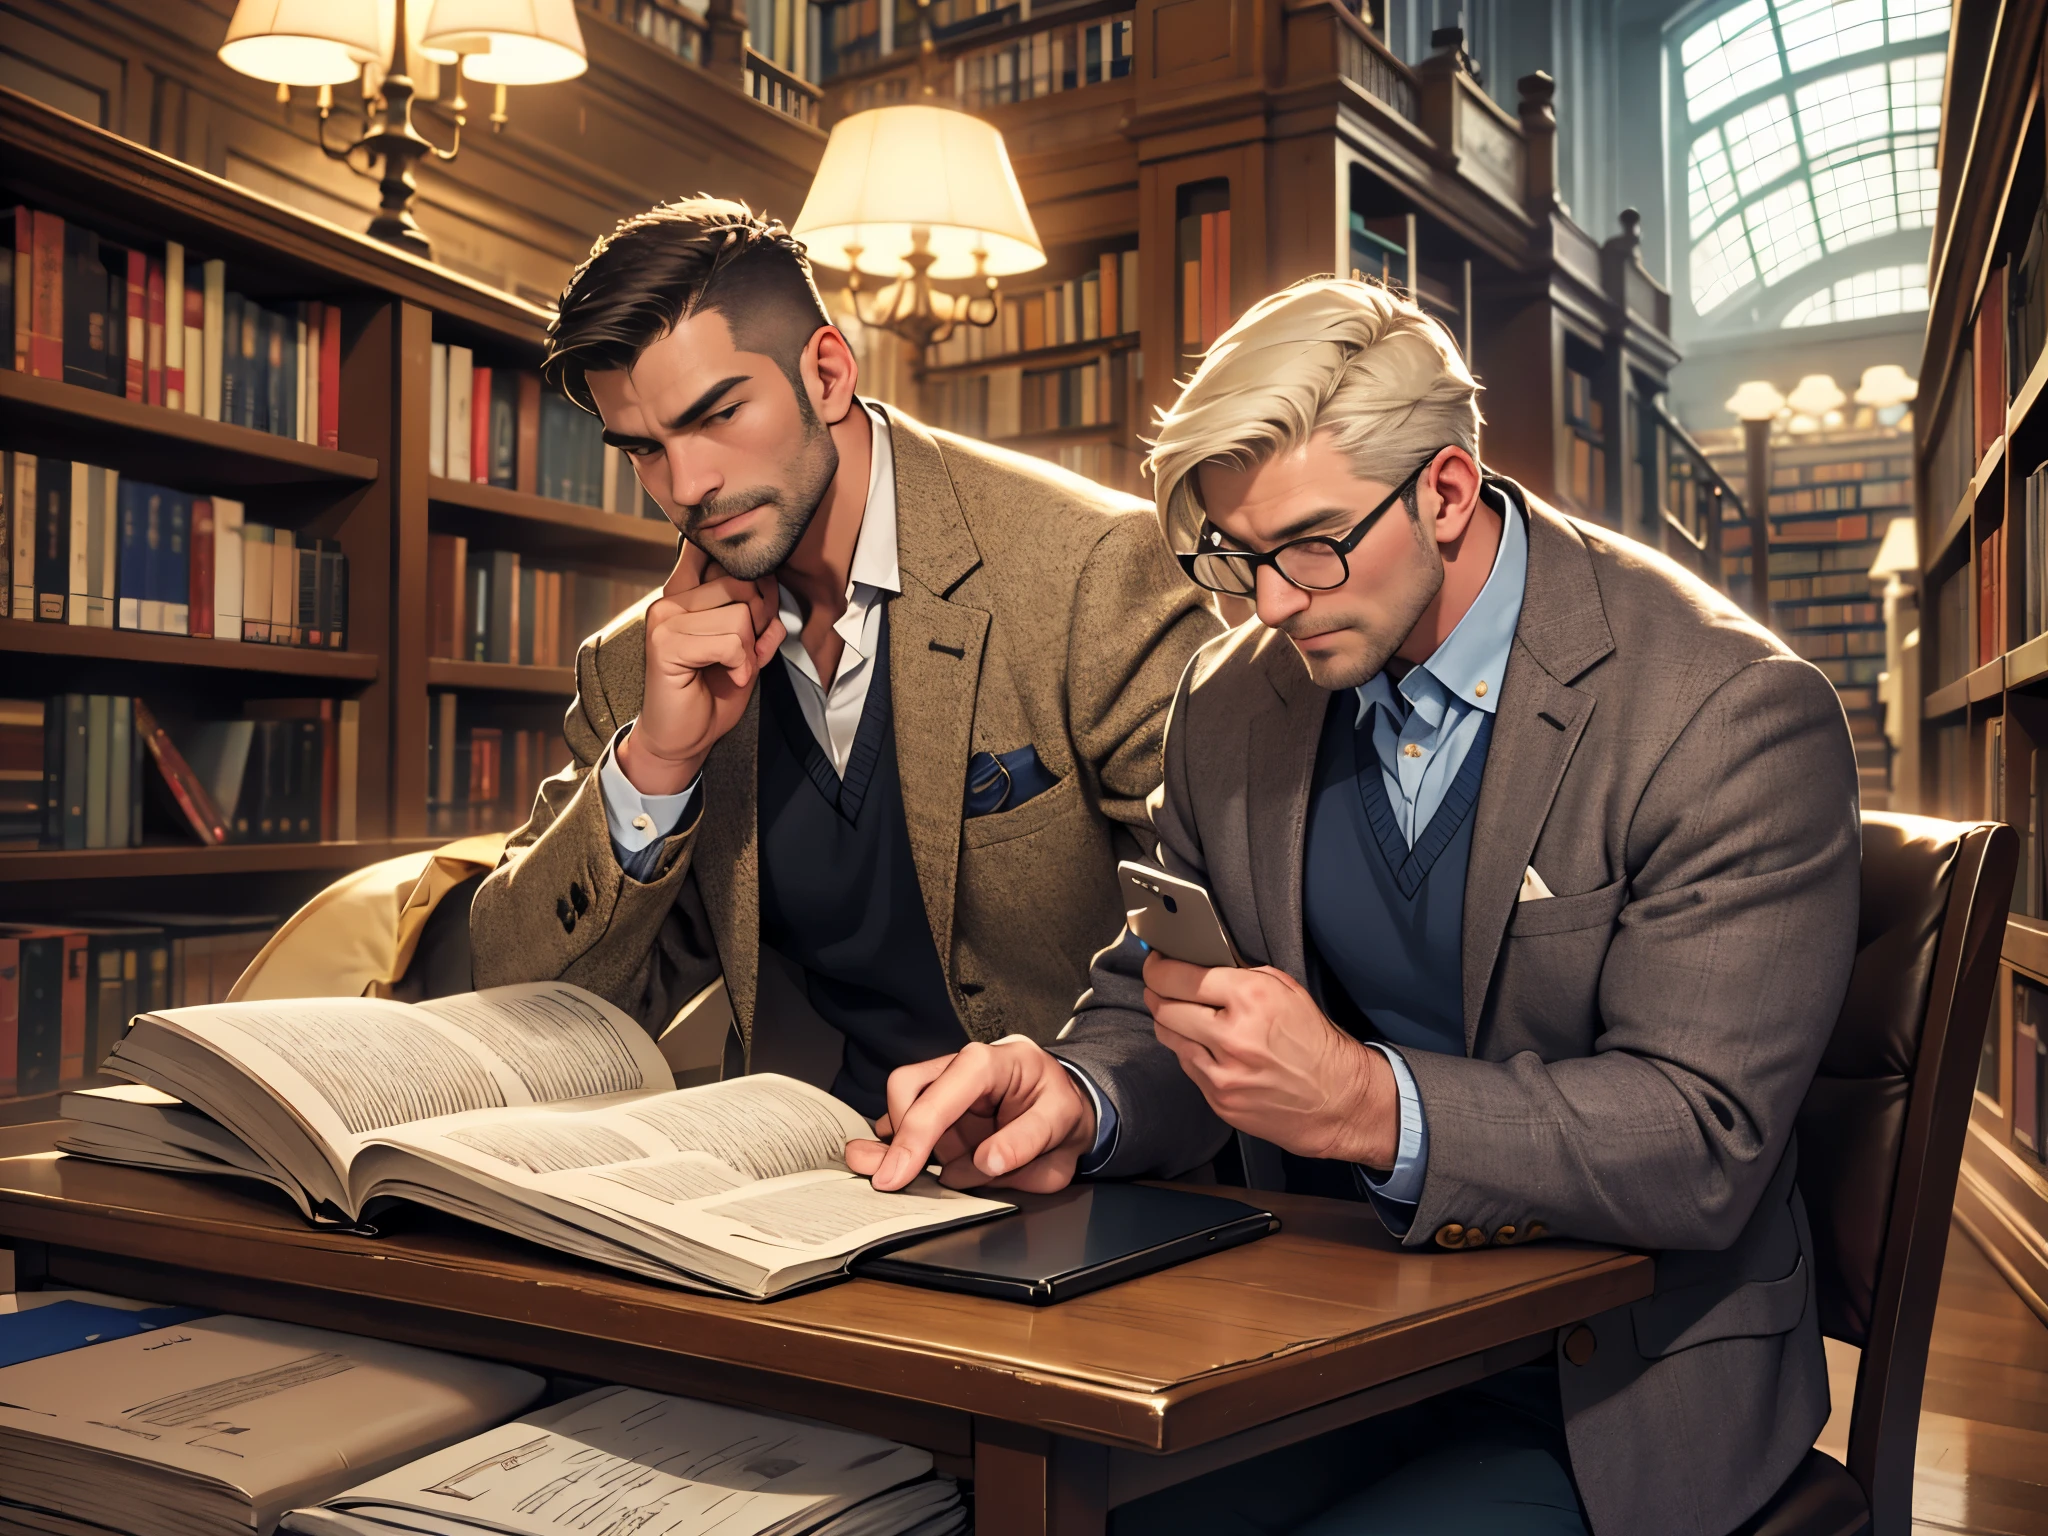 wise middle-aged professor, charming, attractive, muscular man, tweed jacket with elbow patches, classic library setting, scholarly look